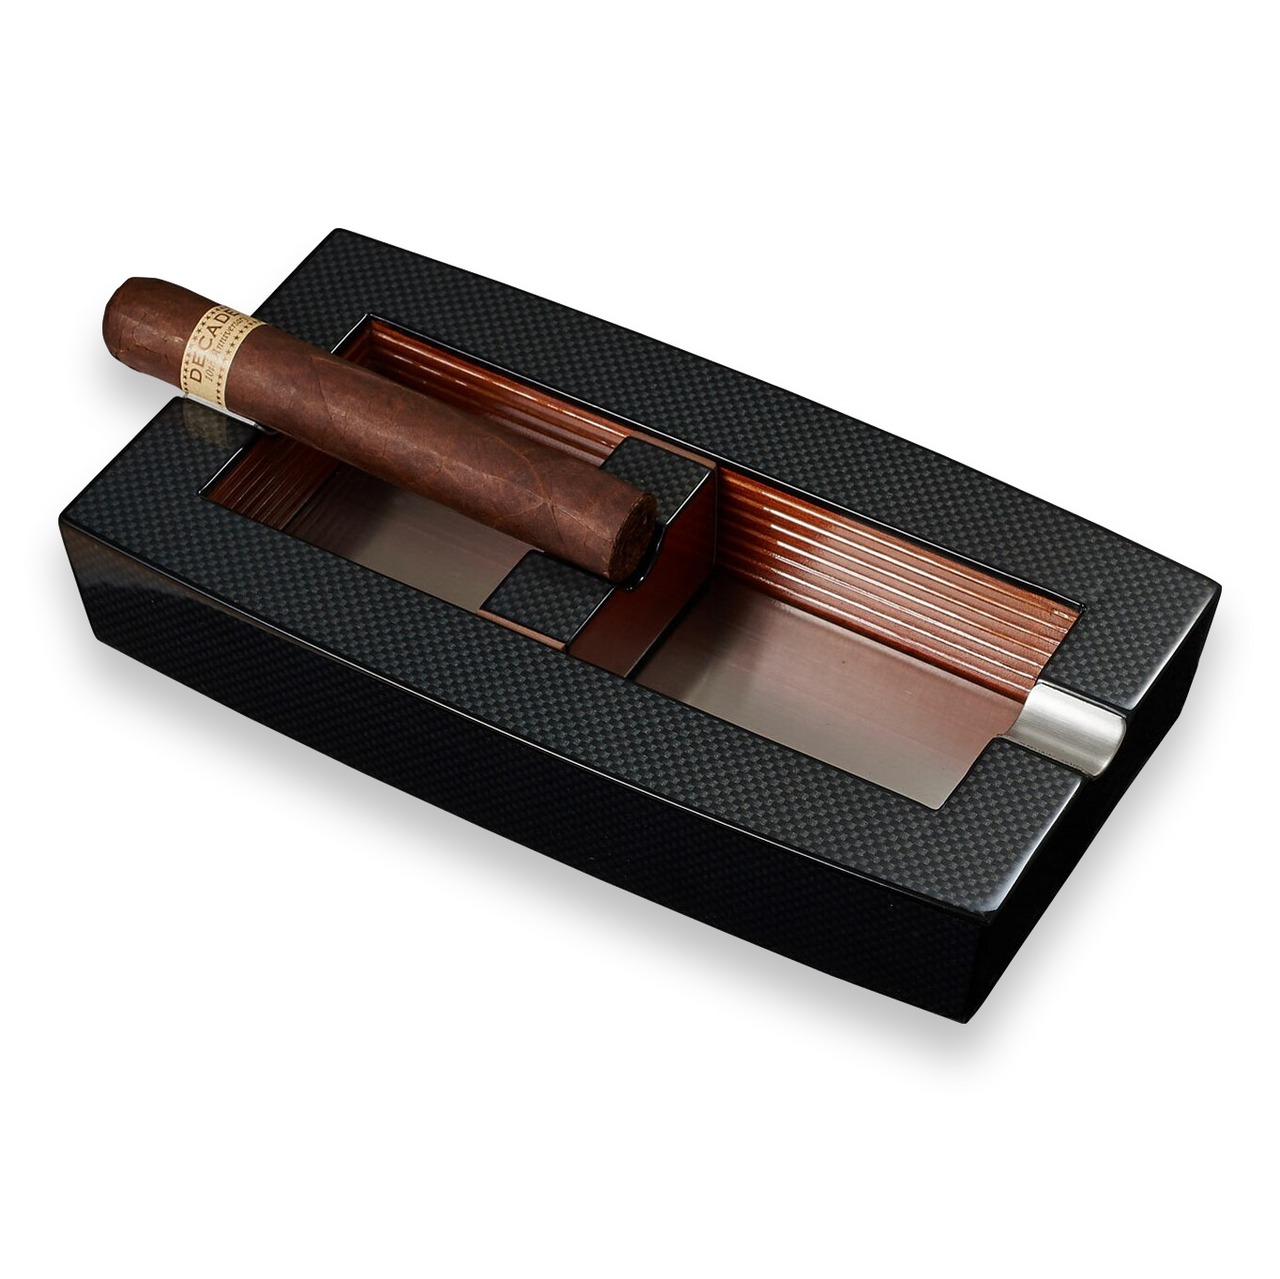 https://cdn11.bigcommerce.com/s-c63ufk/images/stencil/1280x1280/products/1544/7758/Visol-Normandy-Elongated-Carbon-Fiber-2-Cigar-Ashtray-with-Adjustable-Cigar-Rests-VASH724-Exterior-Front-with-Cigar-1_clipped_rev_1__95629.1616295254.png?c=2?imbypass=on